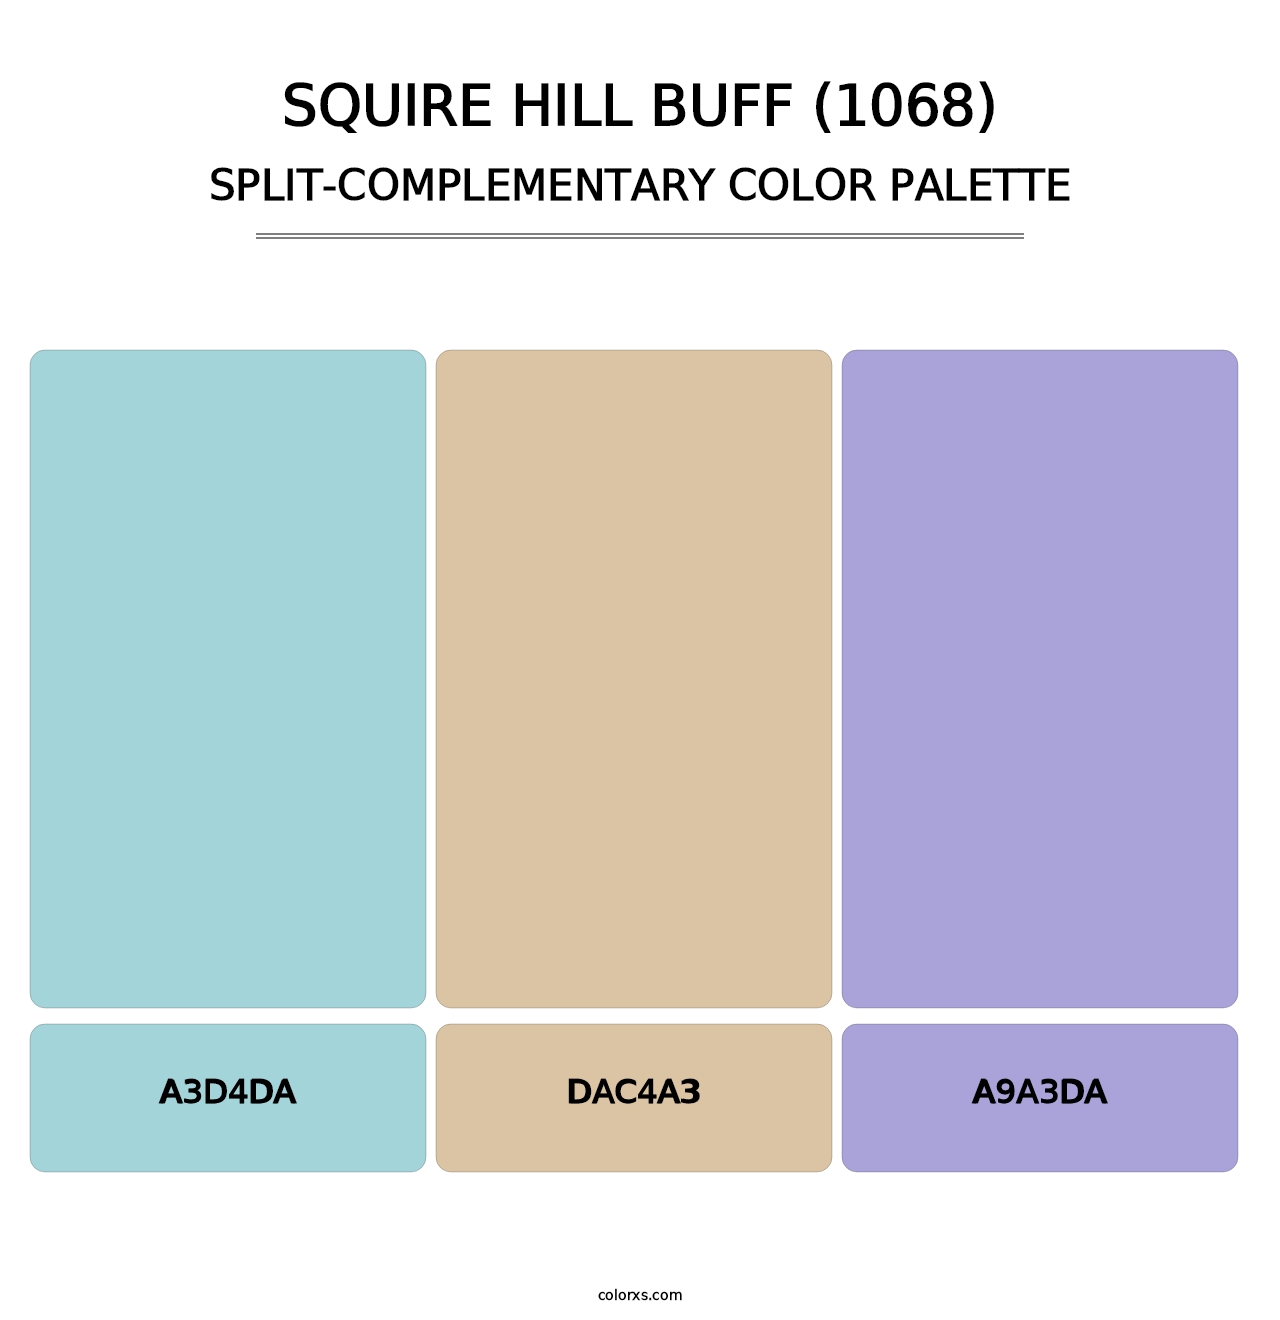 Squire Hill Buff (1068) - Split-Complementary Color Palette